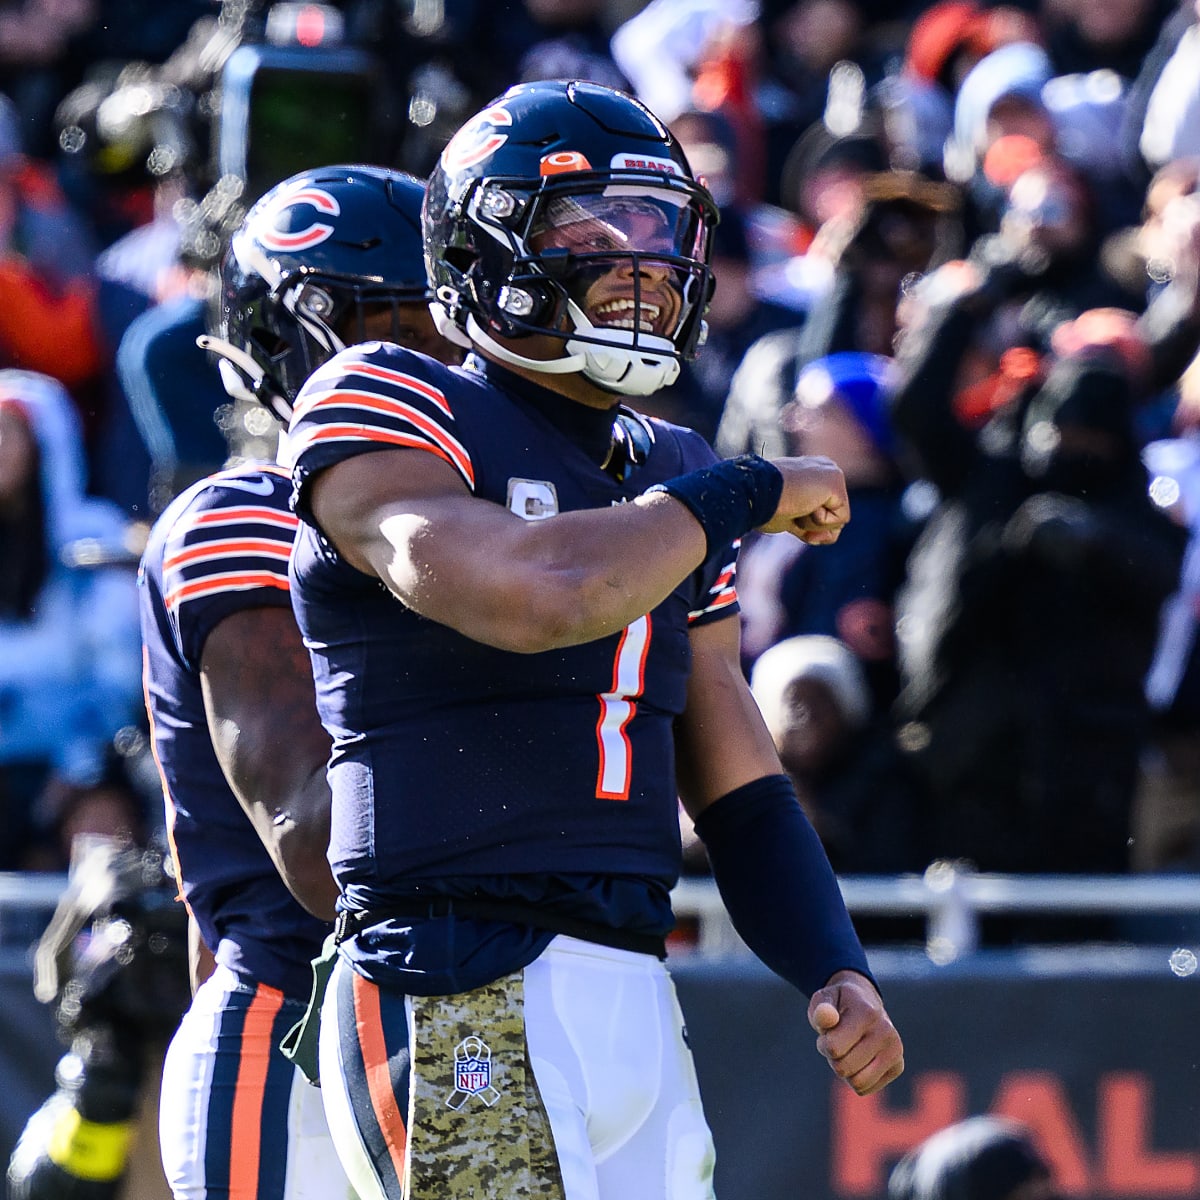 Quarterback Justin Fields of the Chicago Bears celebrates a